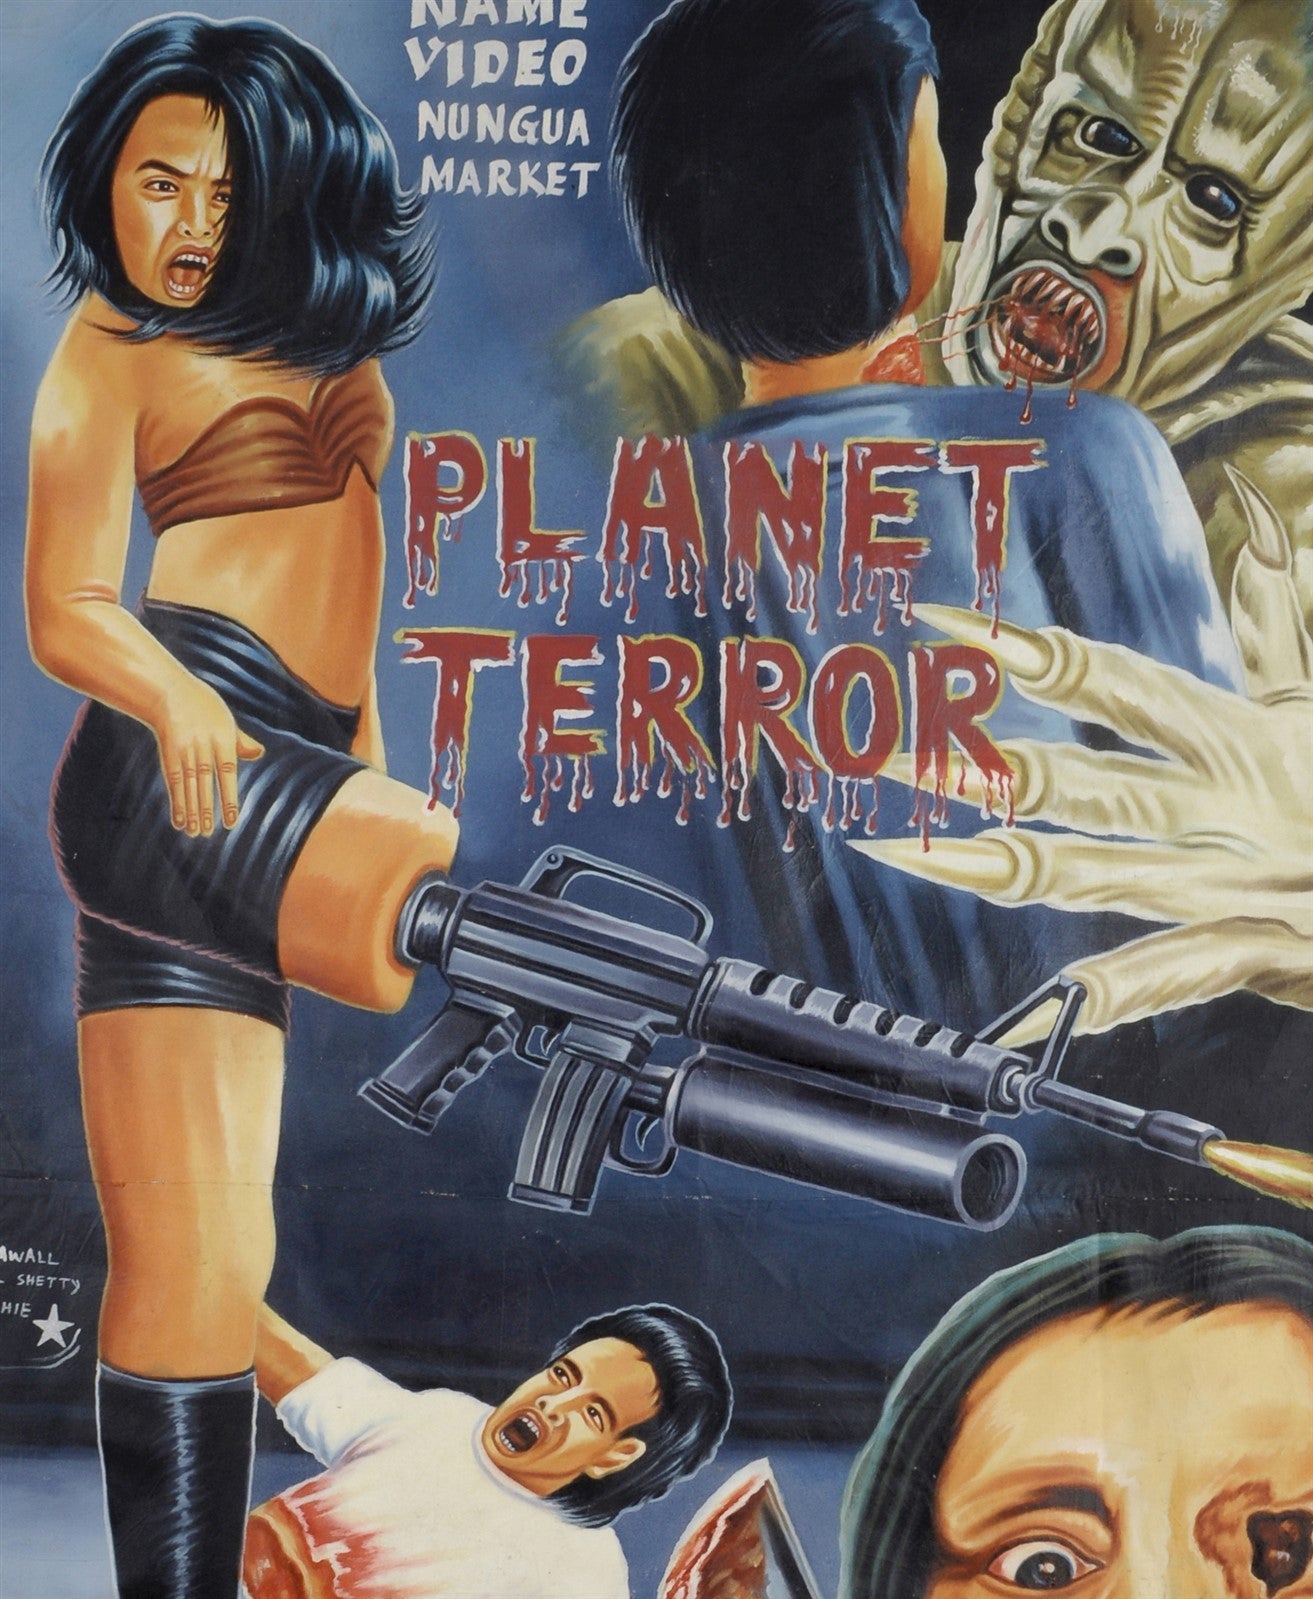 PLANET TERROR MOVIE POSTER HAND PAINTED IN GHANA FOR THE LOCAL CINEMA ART MORE DETAILS